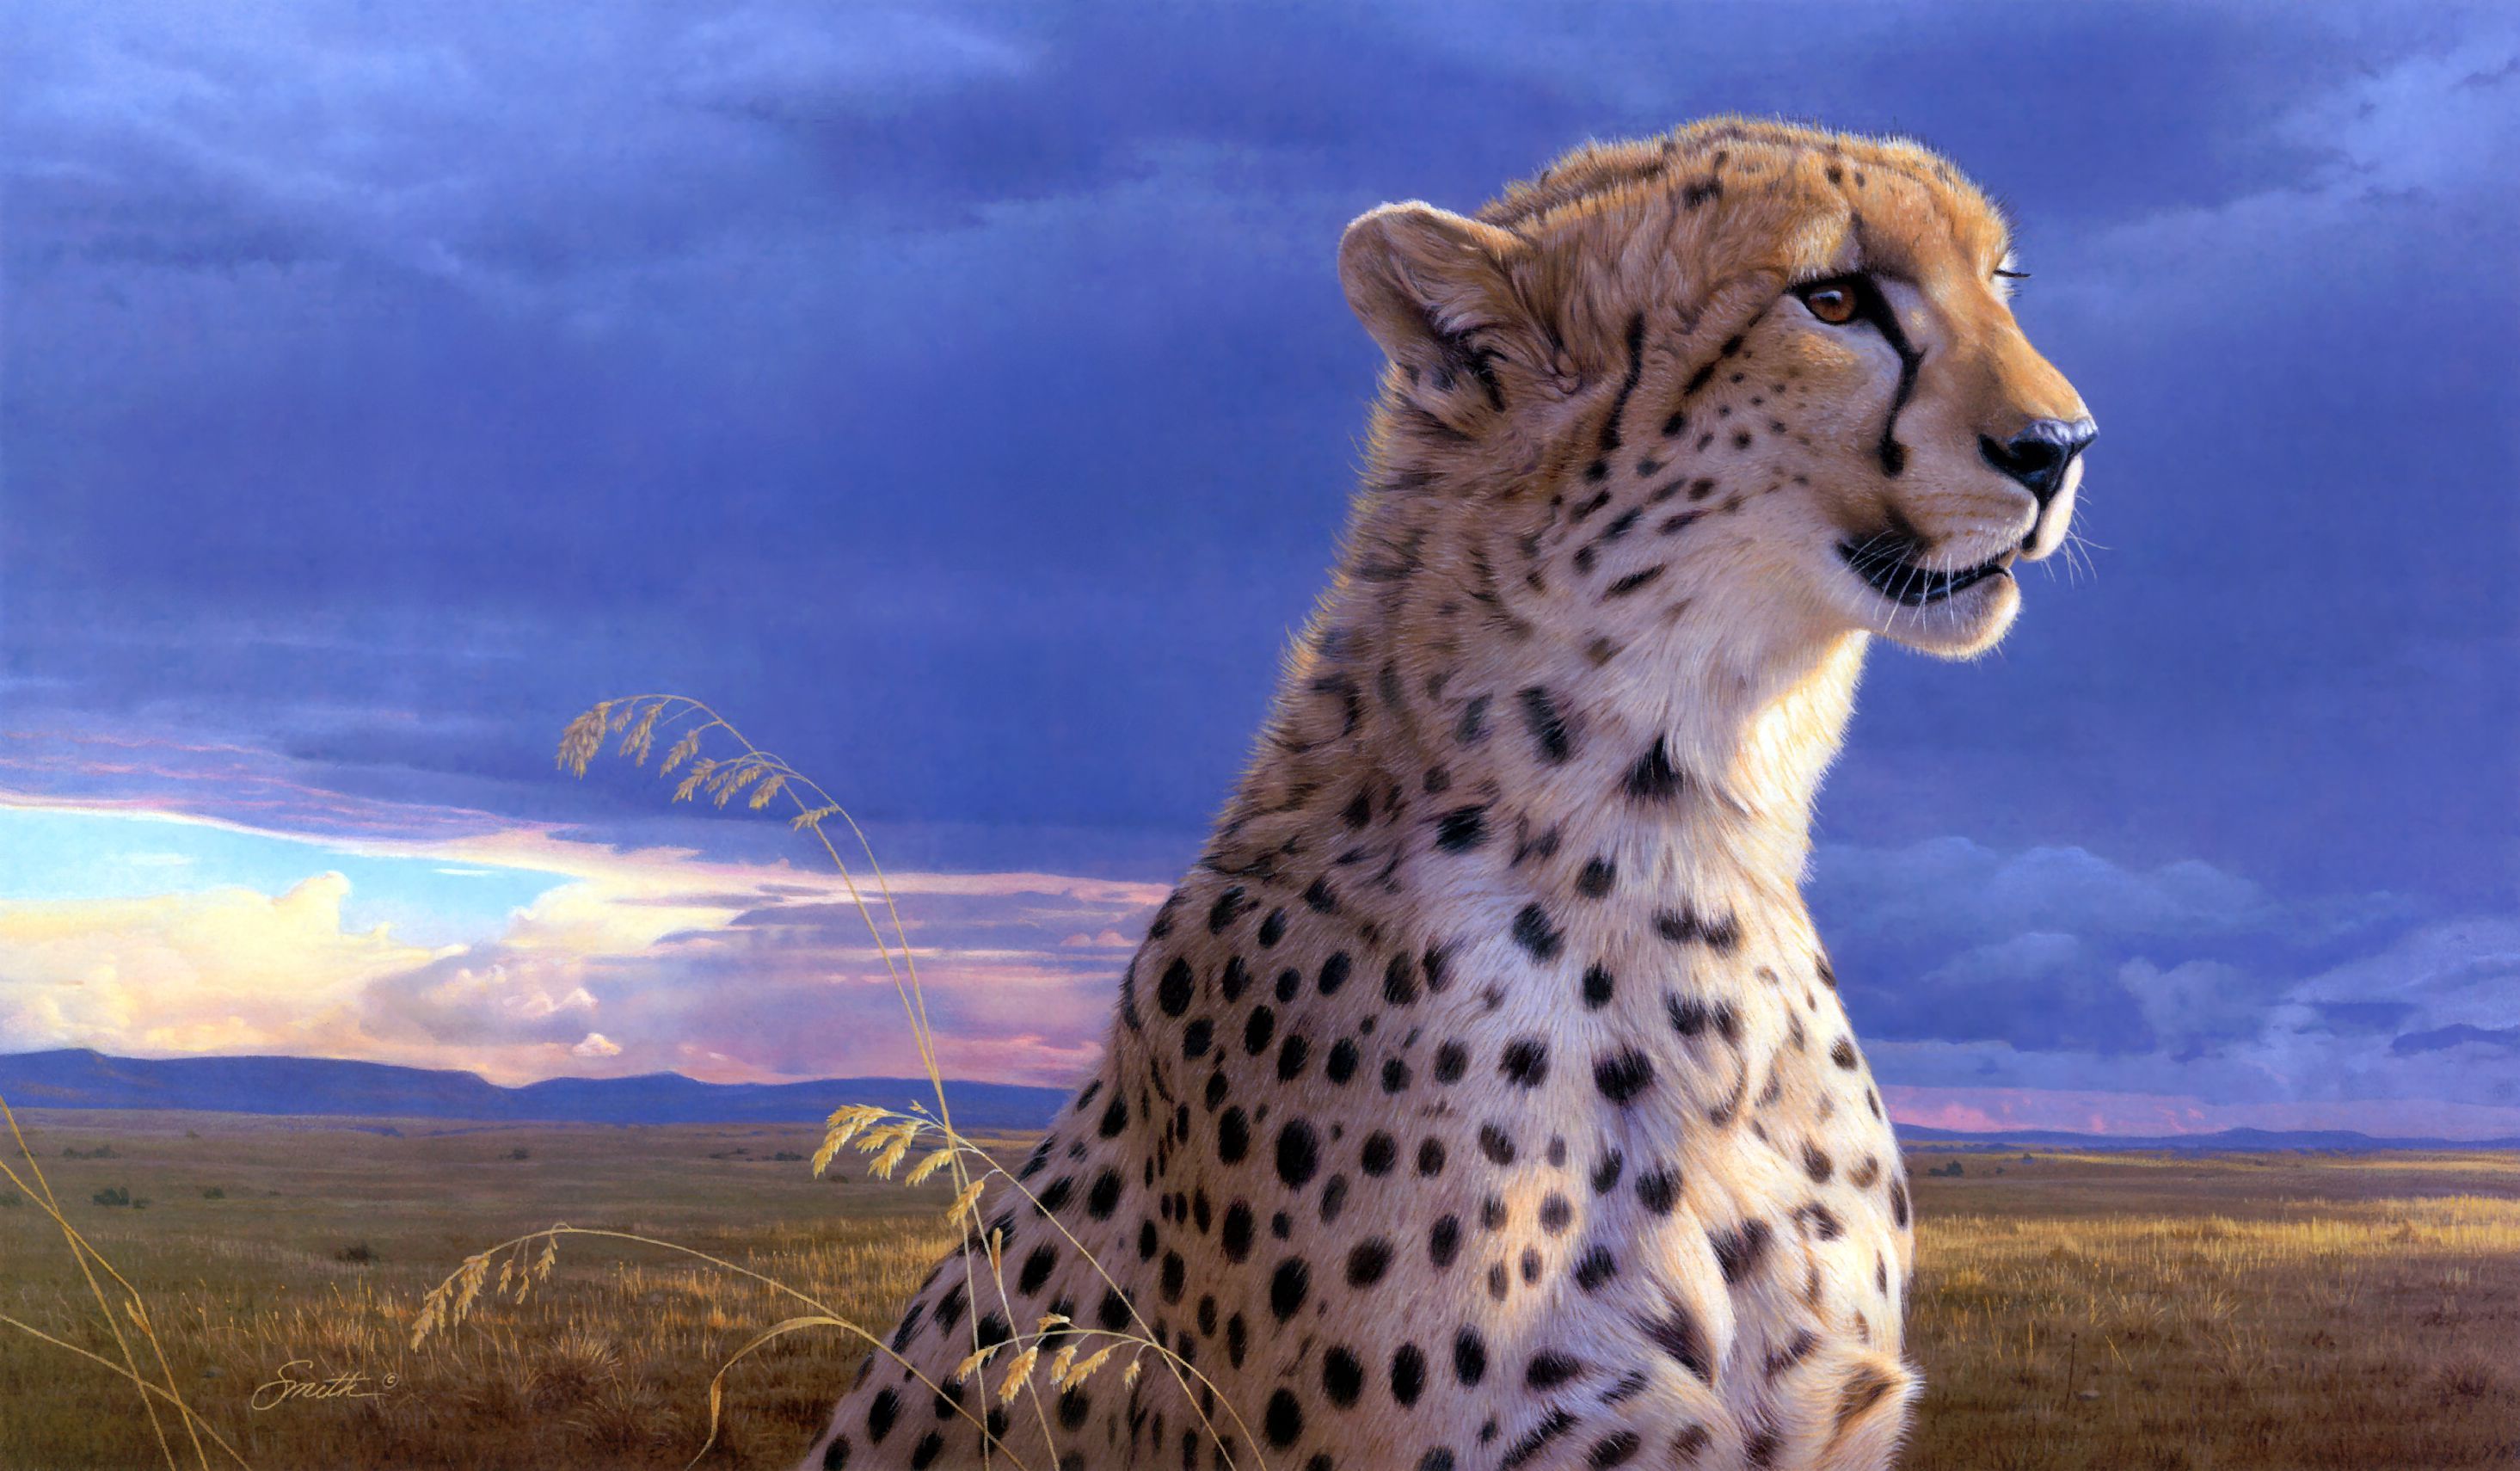  Cheetah HD Wallpapers Backgrounds